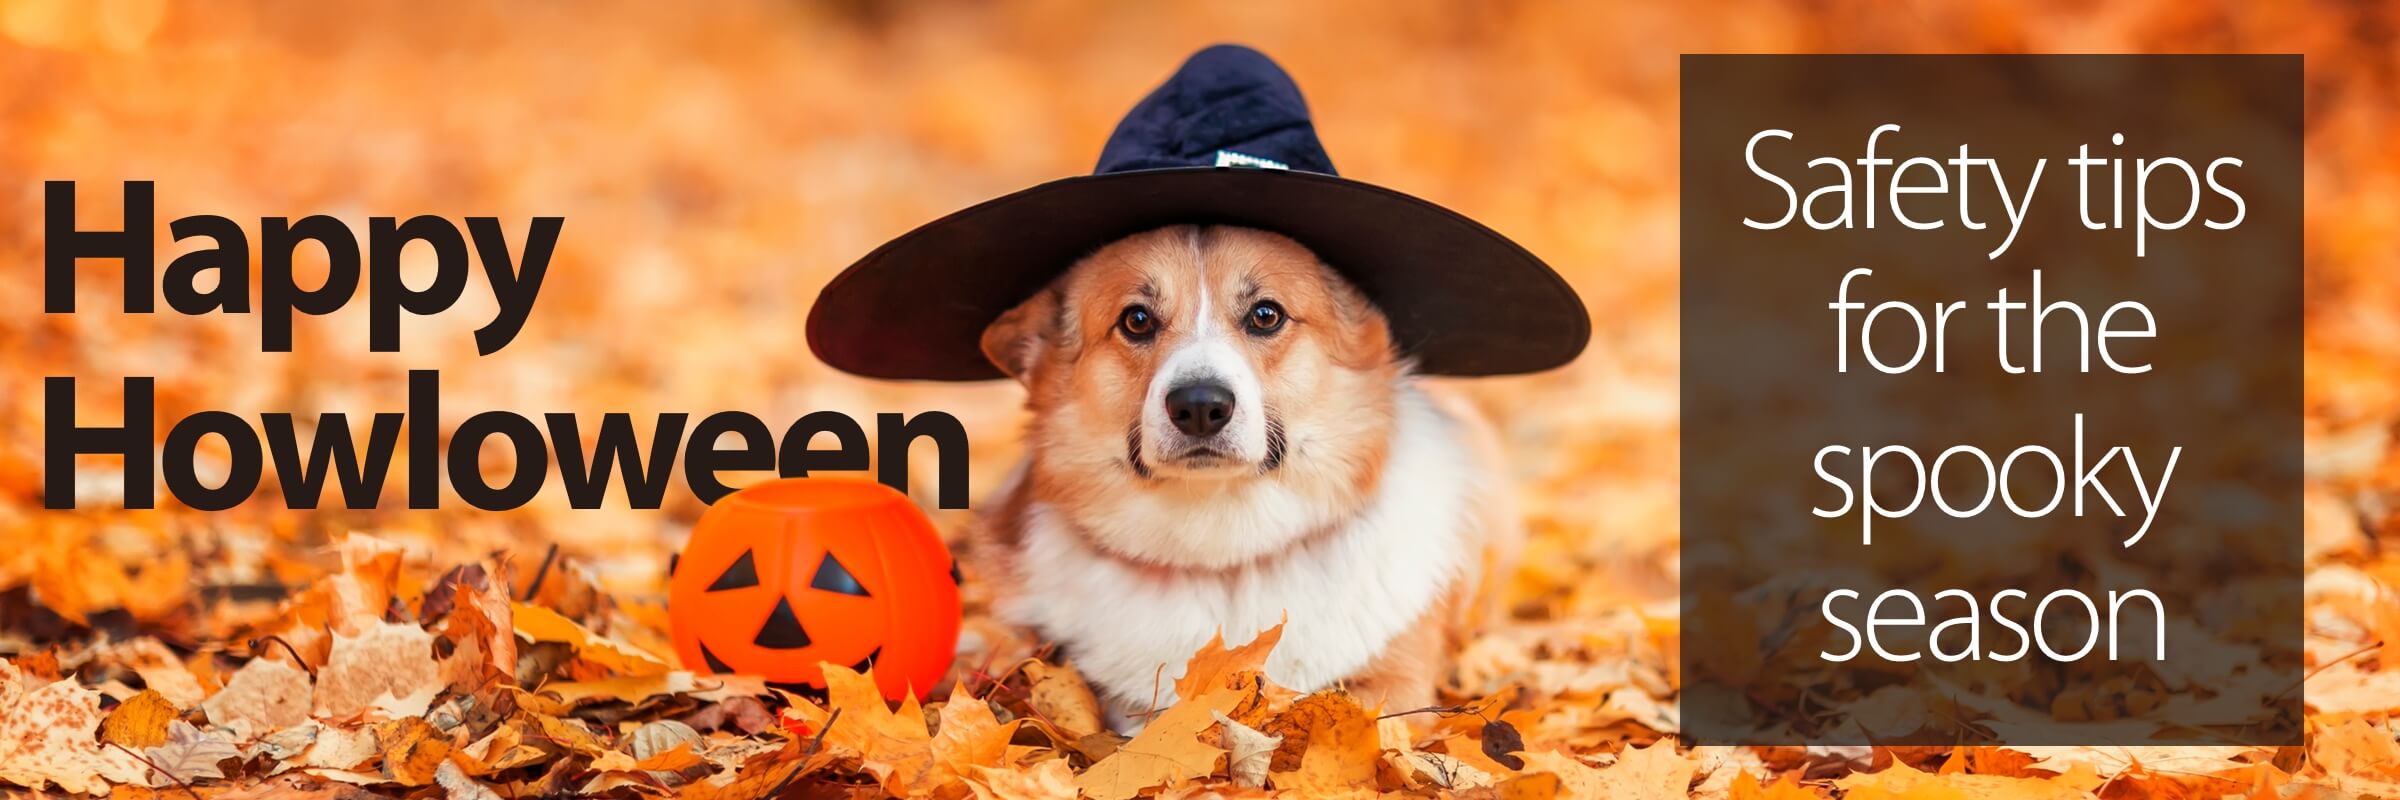 Happy Howloween Safety tips for the spooky season